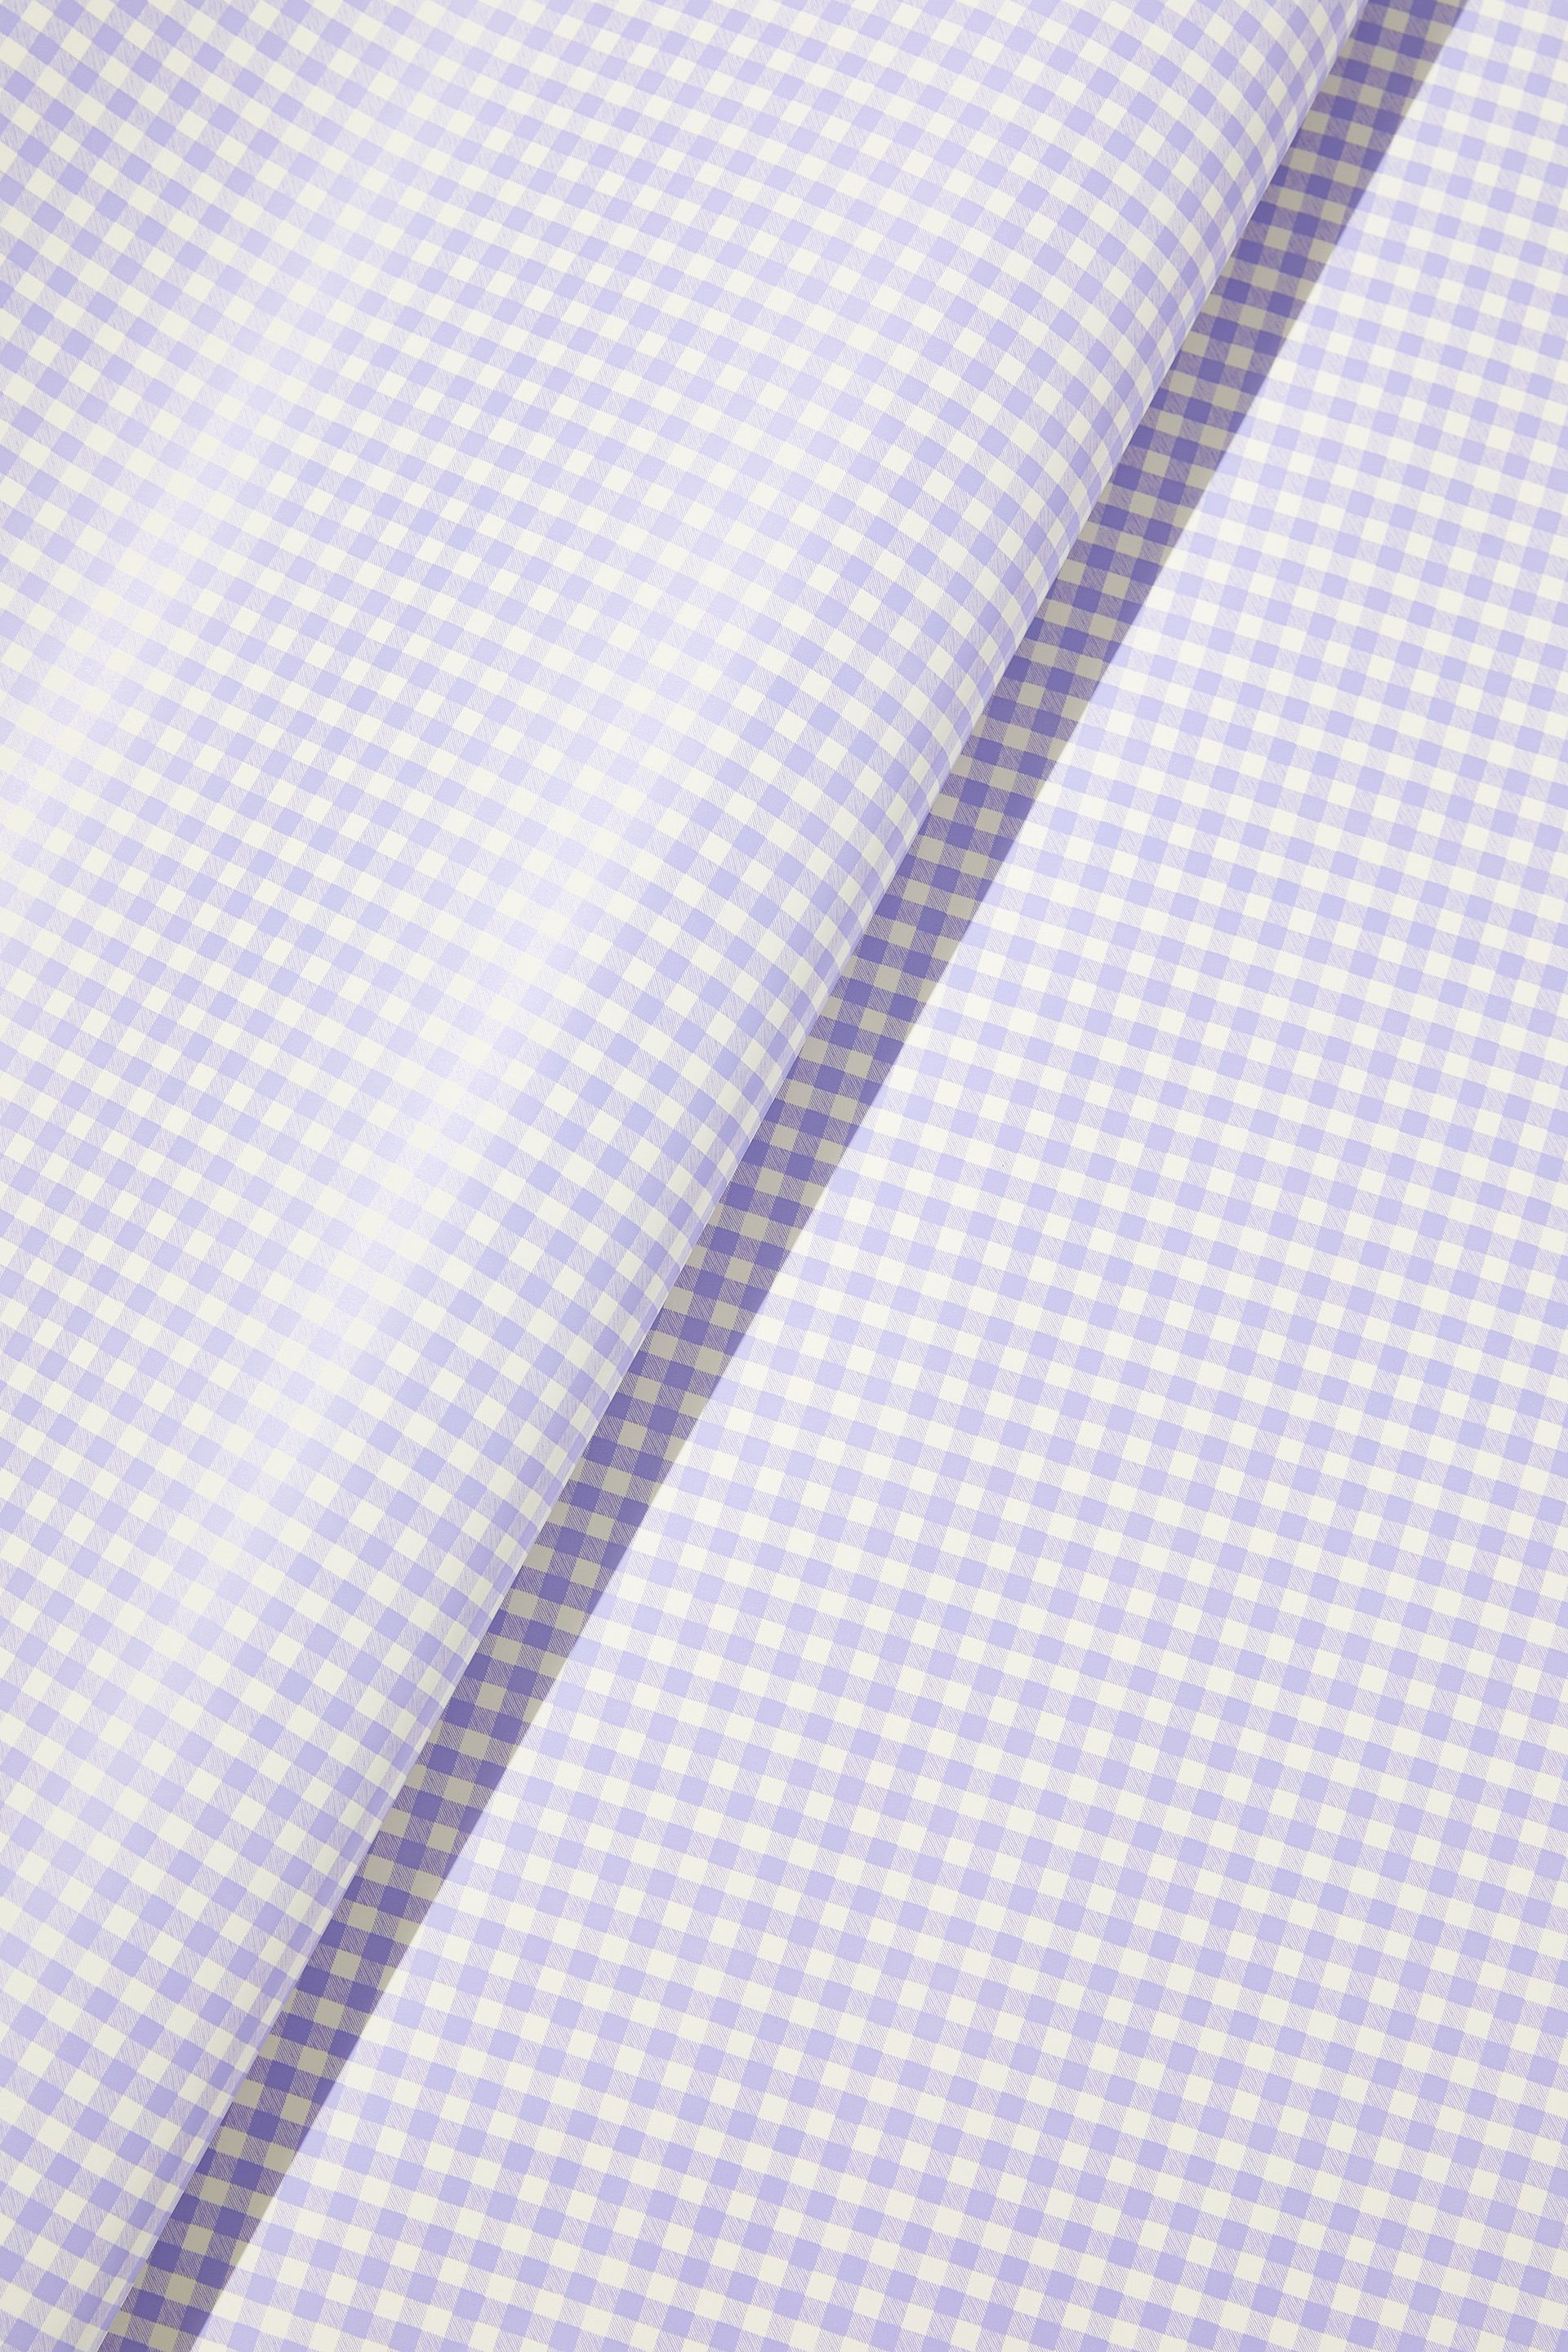 Typo - Roll Wrapping Paper - Soft lilac gingham